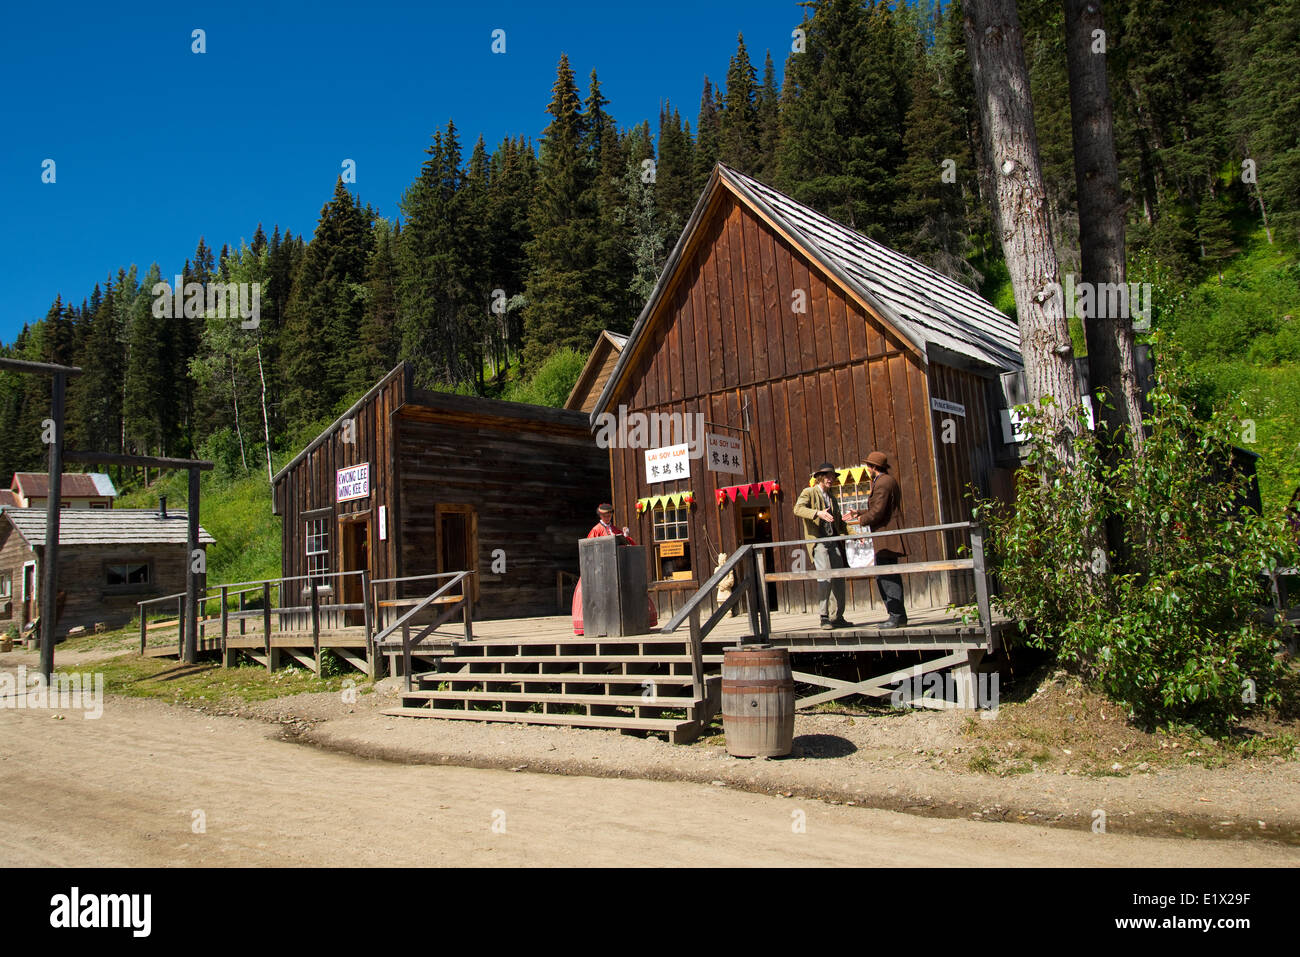 Period re-enactment, Street theatre actors in the historic gold rush townsite of Barkerville. Cariboo Region, British Columbia. Stock Photo